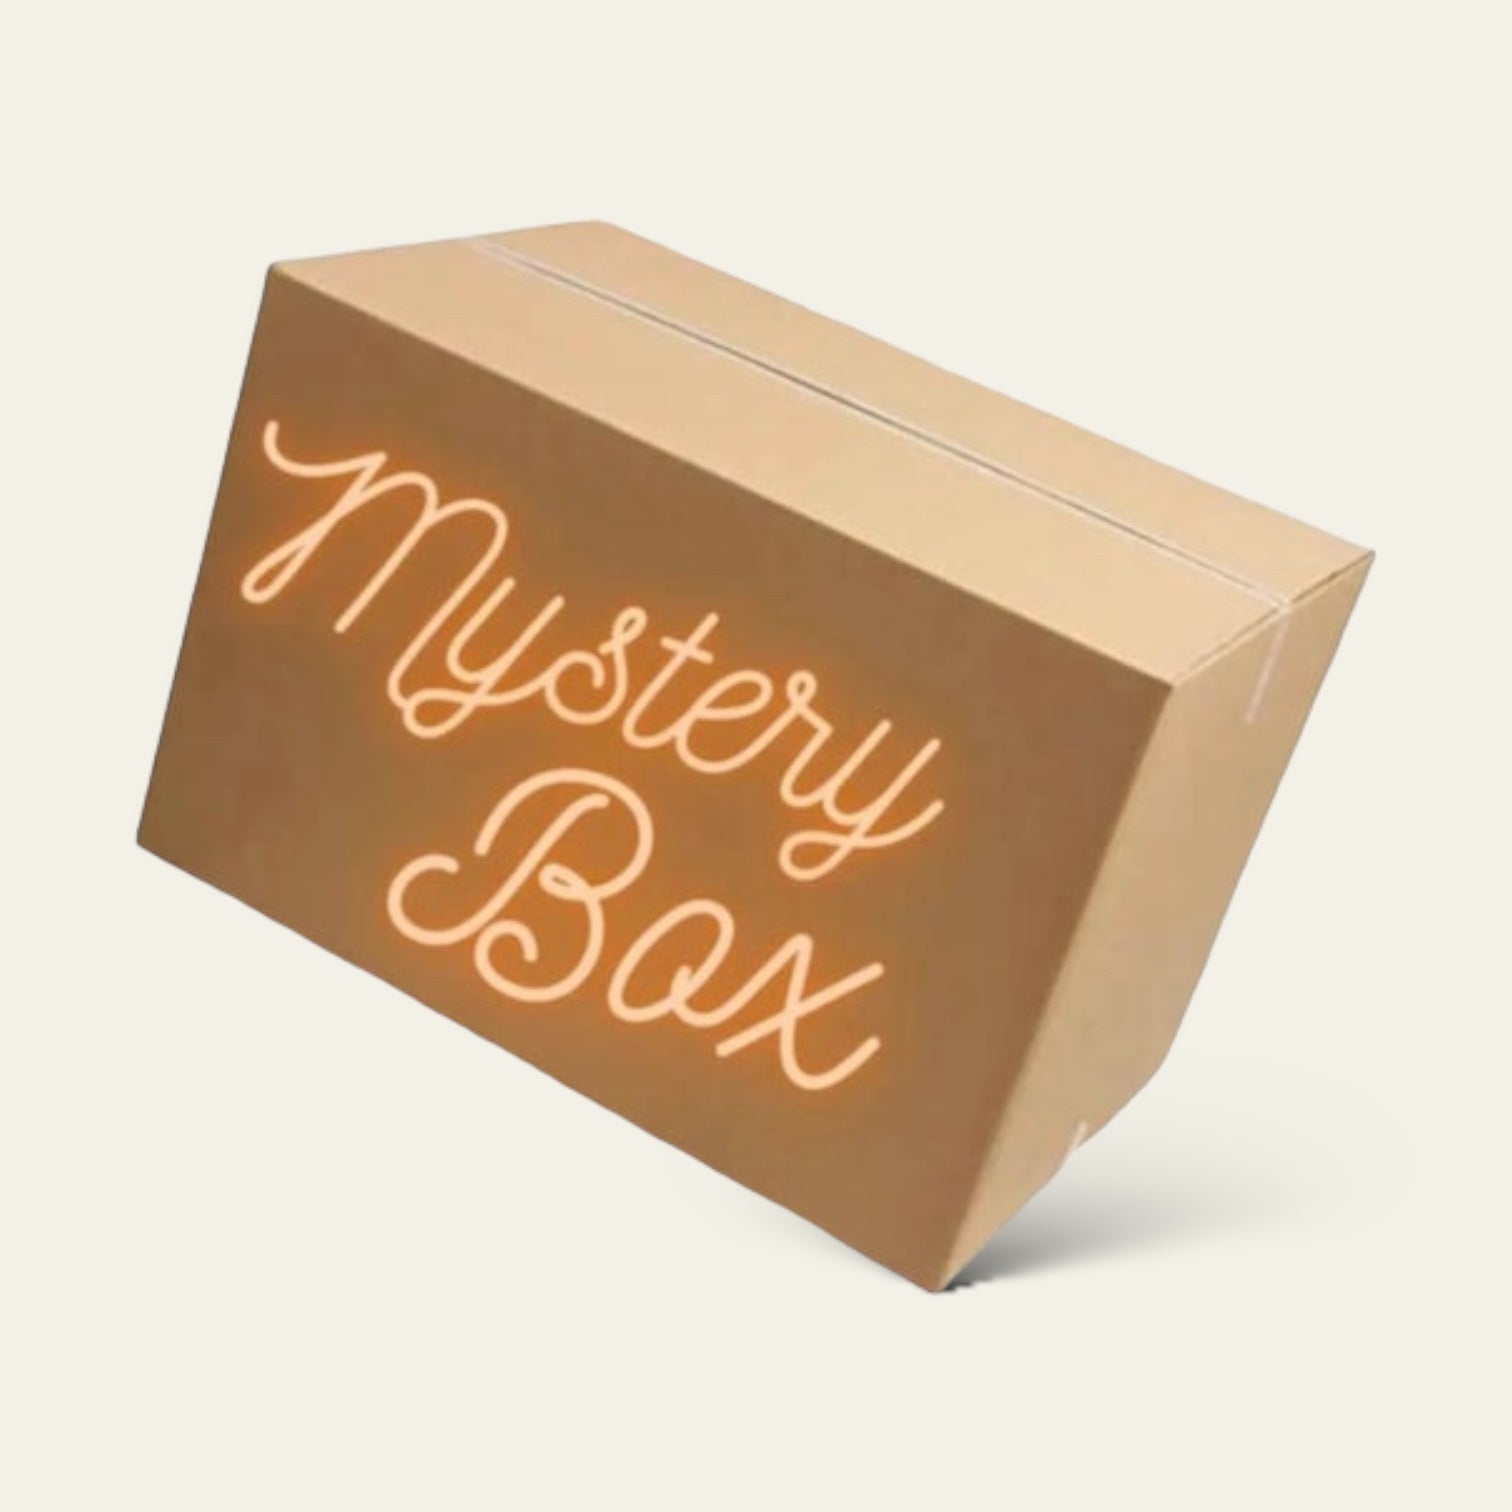 MYSTERY BOX - Psychic Sisters